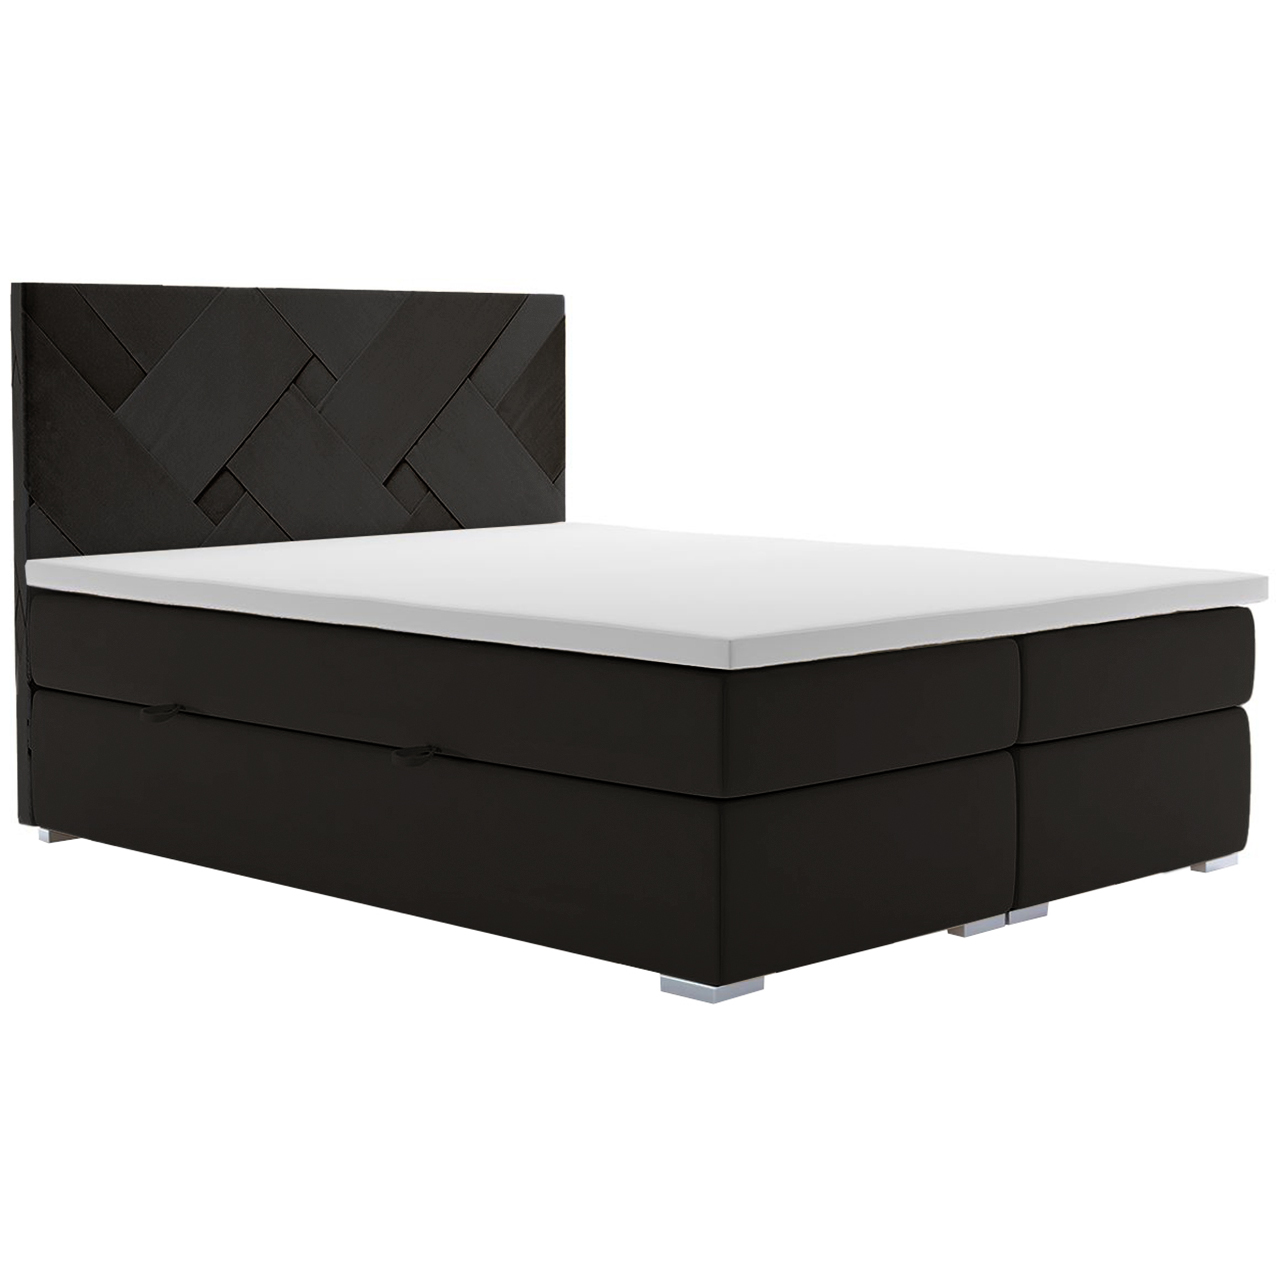 Upholstered bed BALIZO 120x200 riviera 100